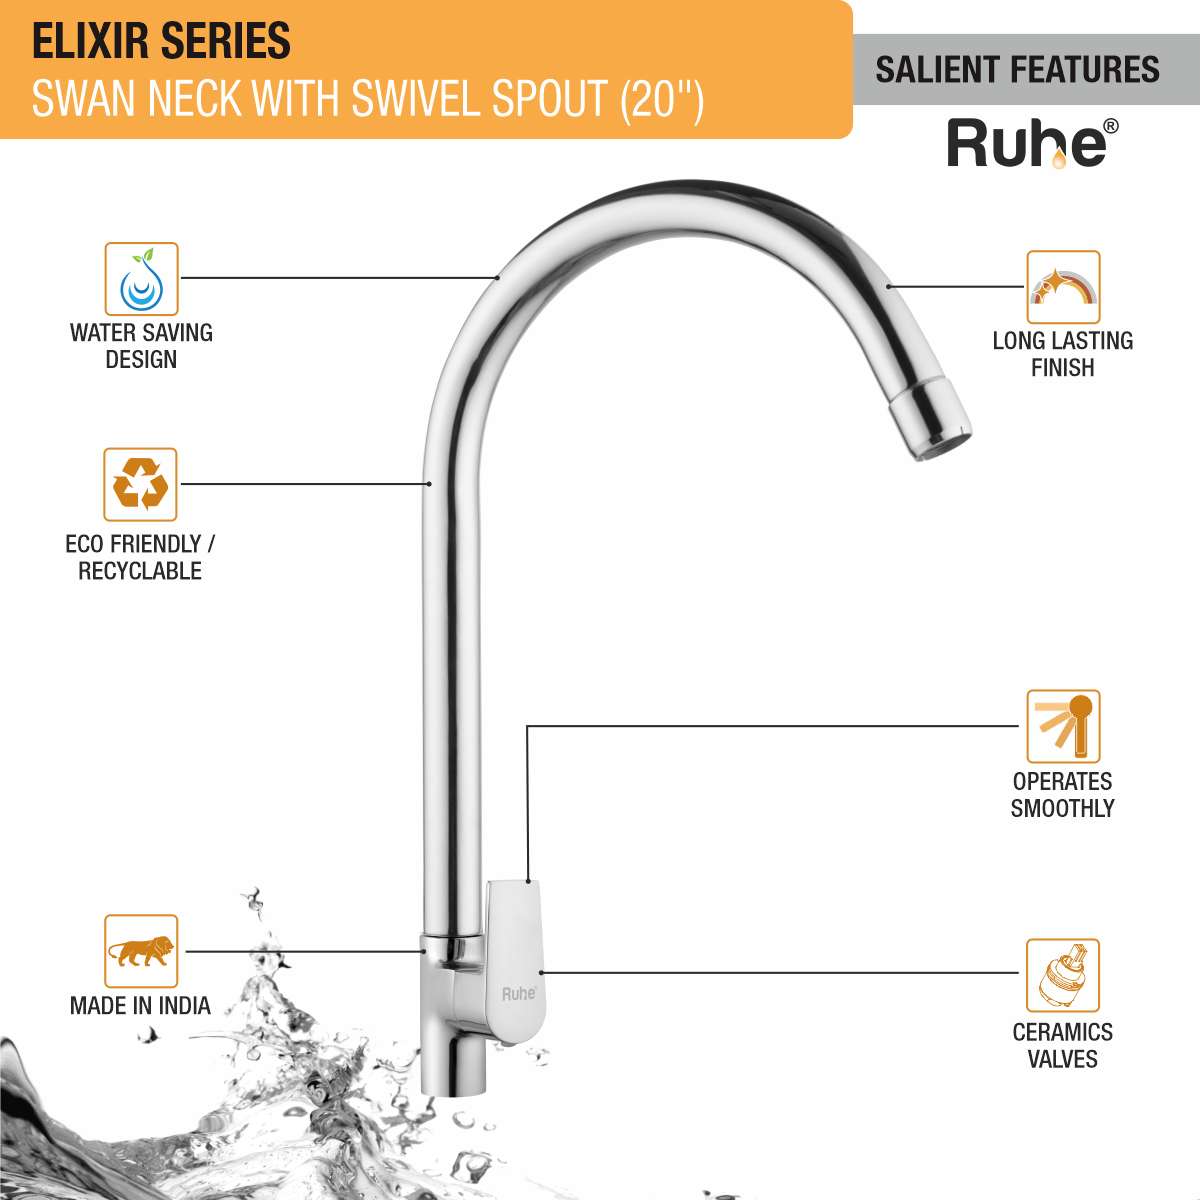 Elixir Swan Neck with Large (20 inches) Round Swivel Spout Faucet features